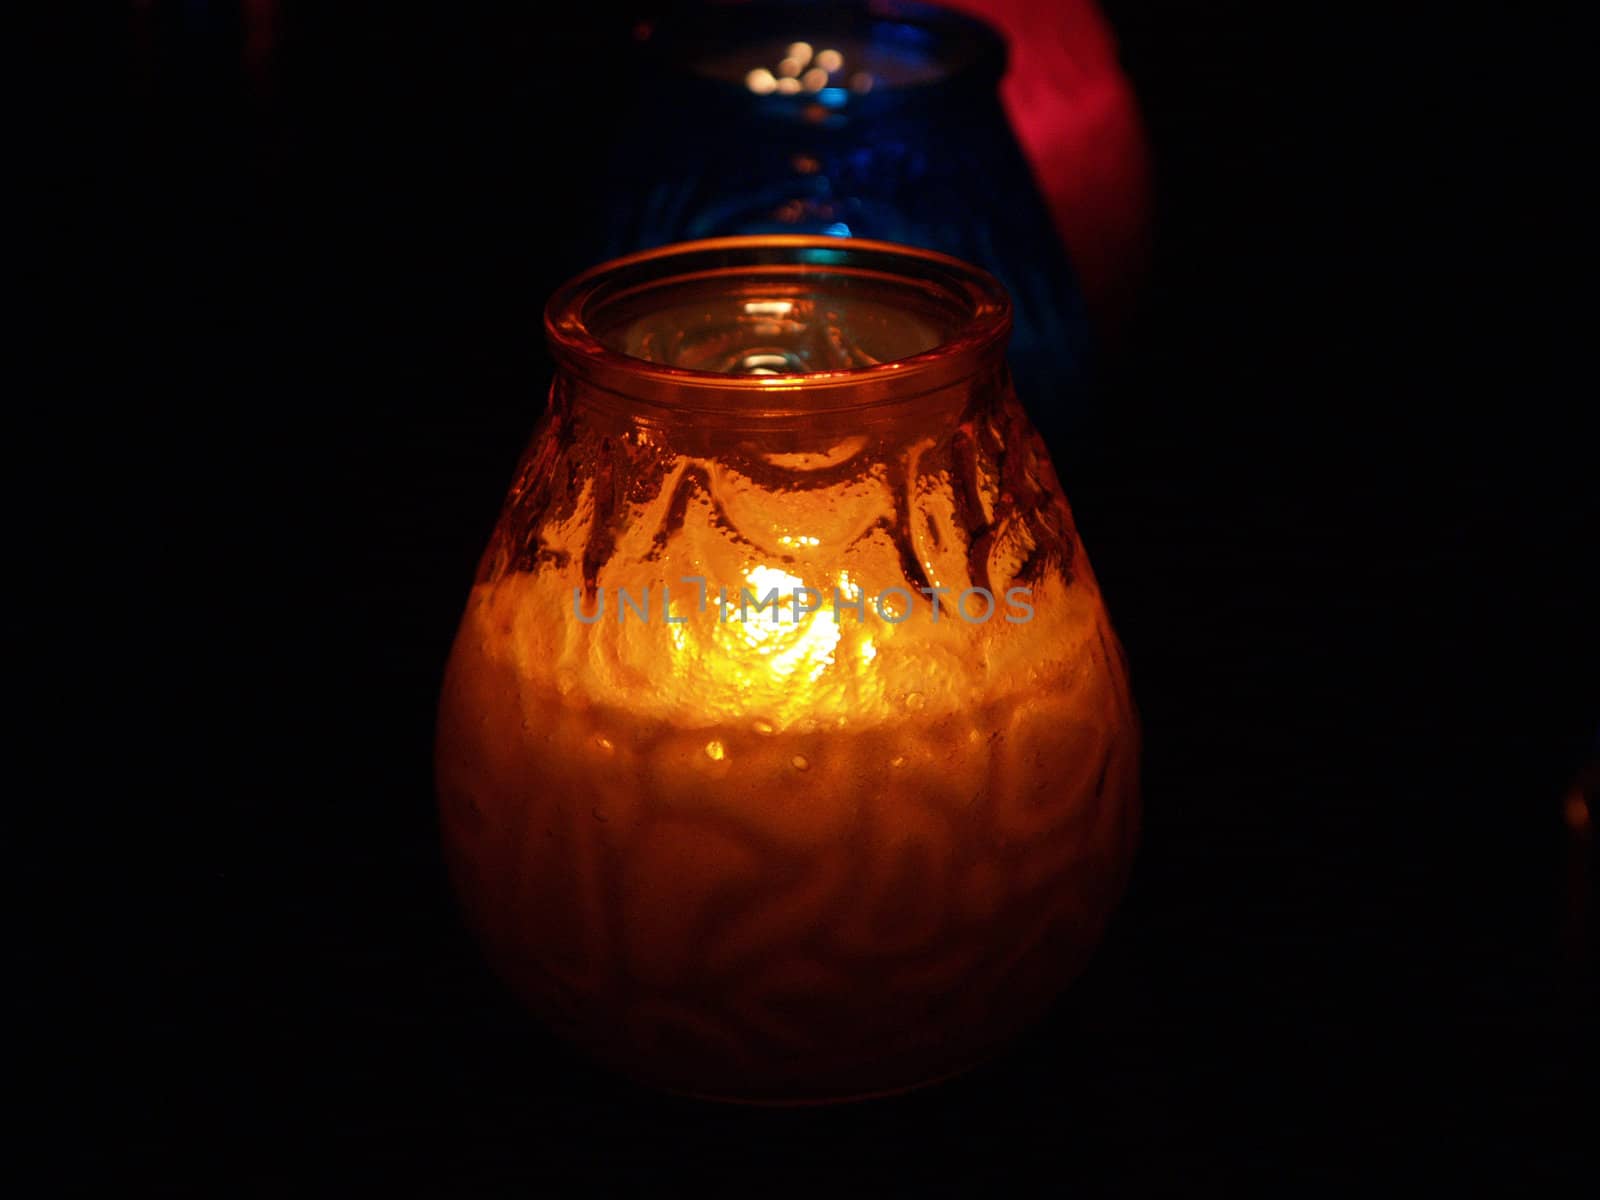 Candles in glass glow in the darkness to create romantic atmosphere